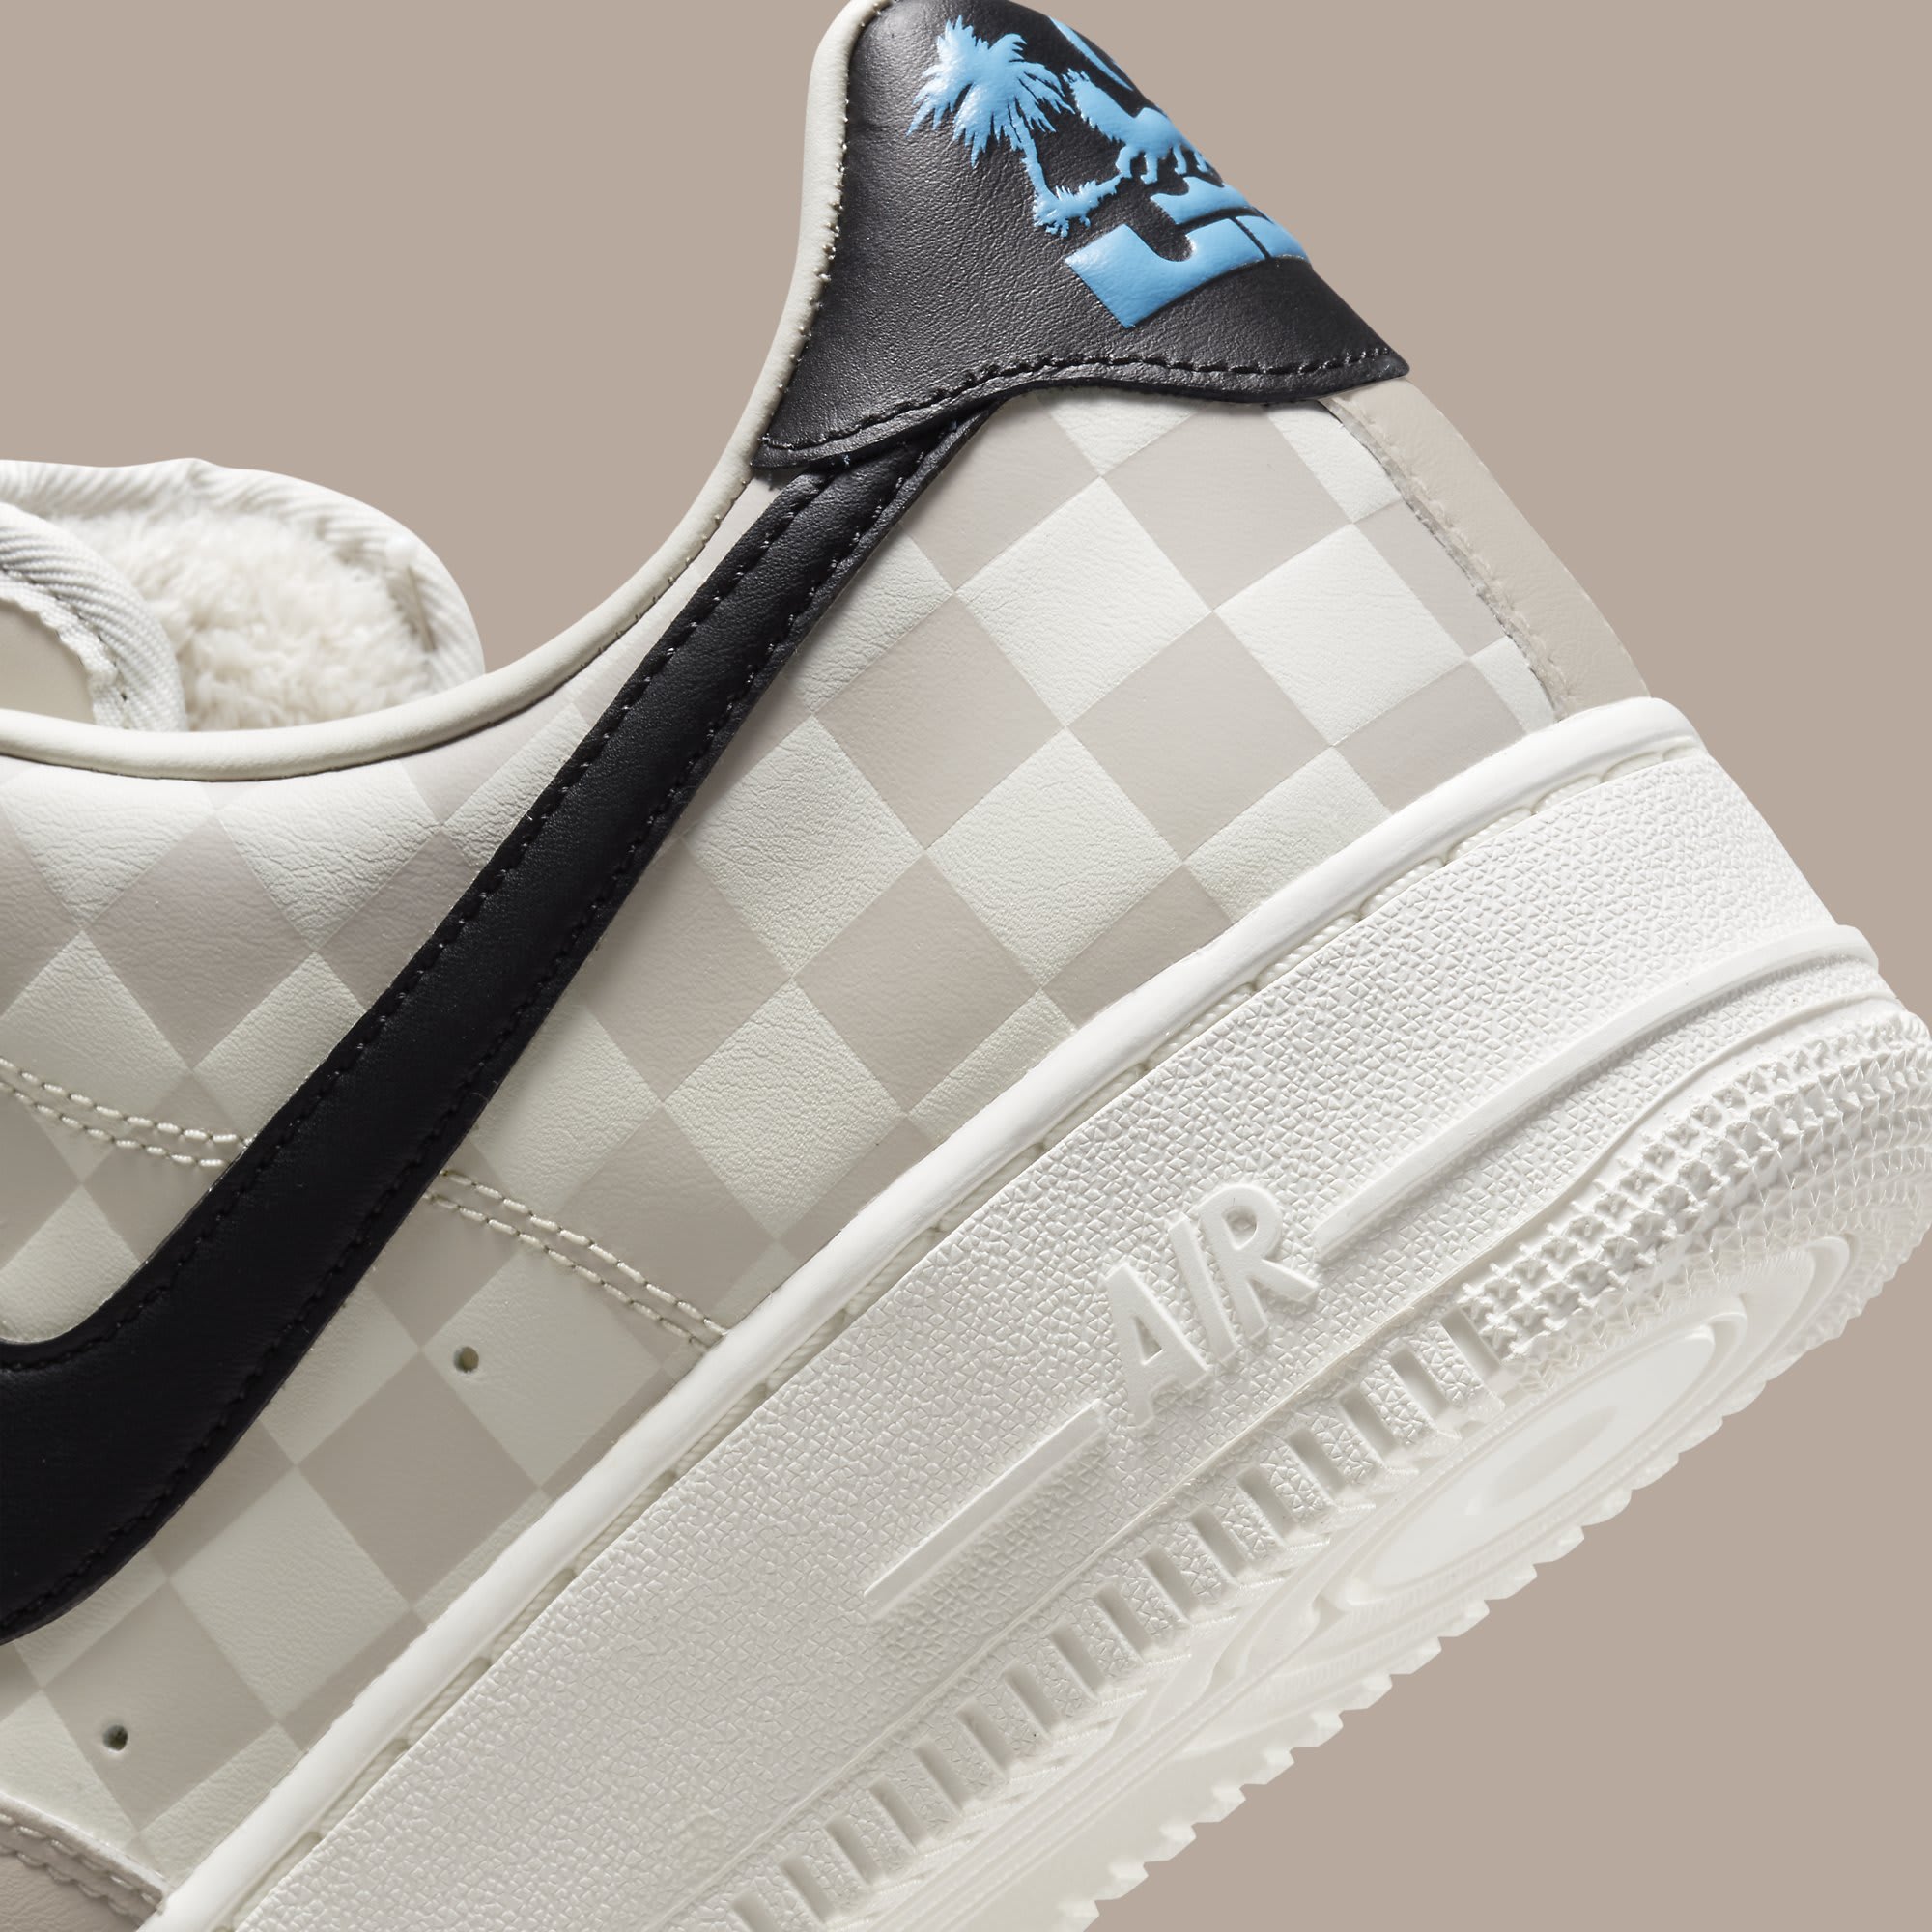 LeBron James x Nike Air Force 1 Low Strive for Greatness Release Date DC8877-200 Heel Detail